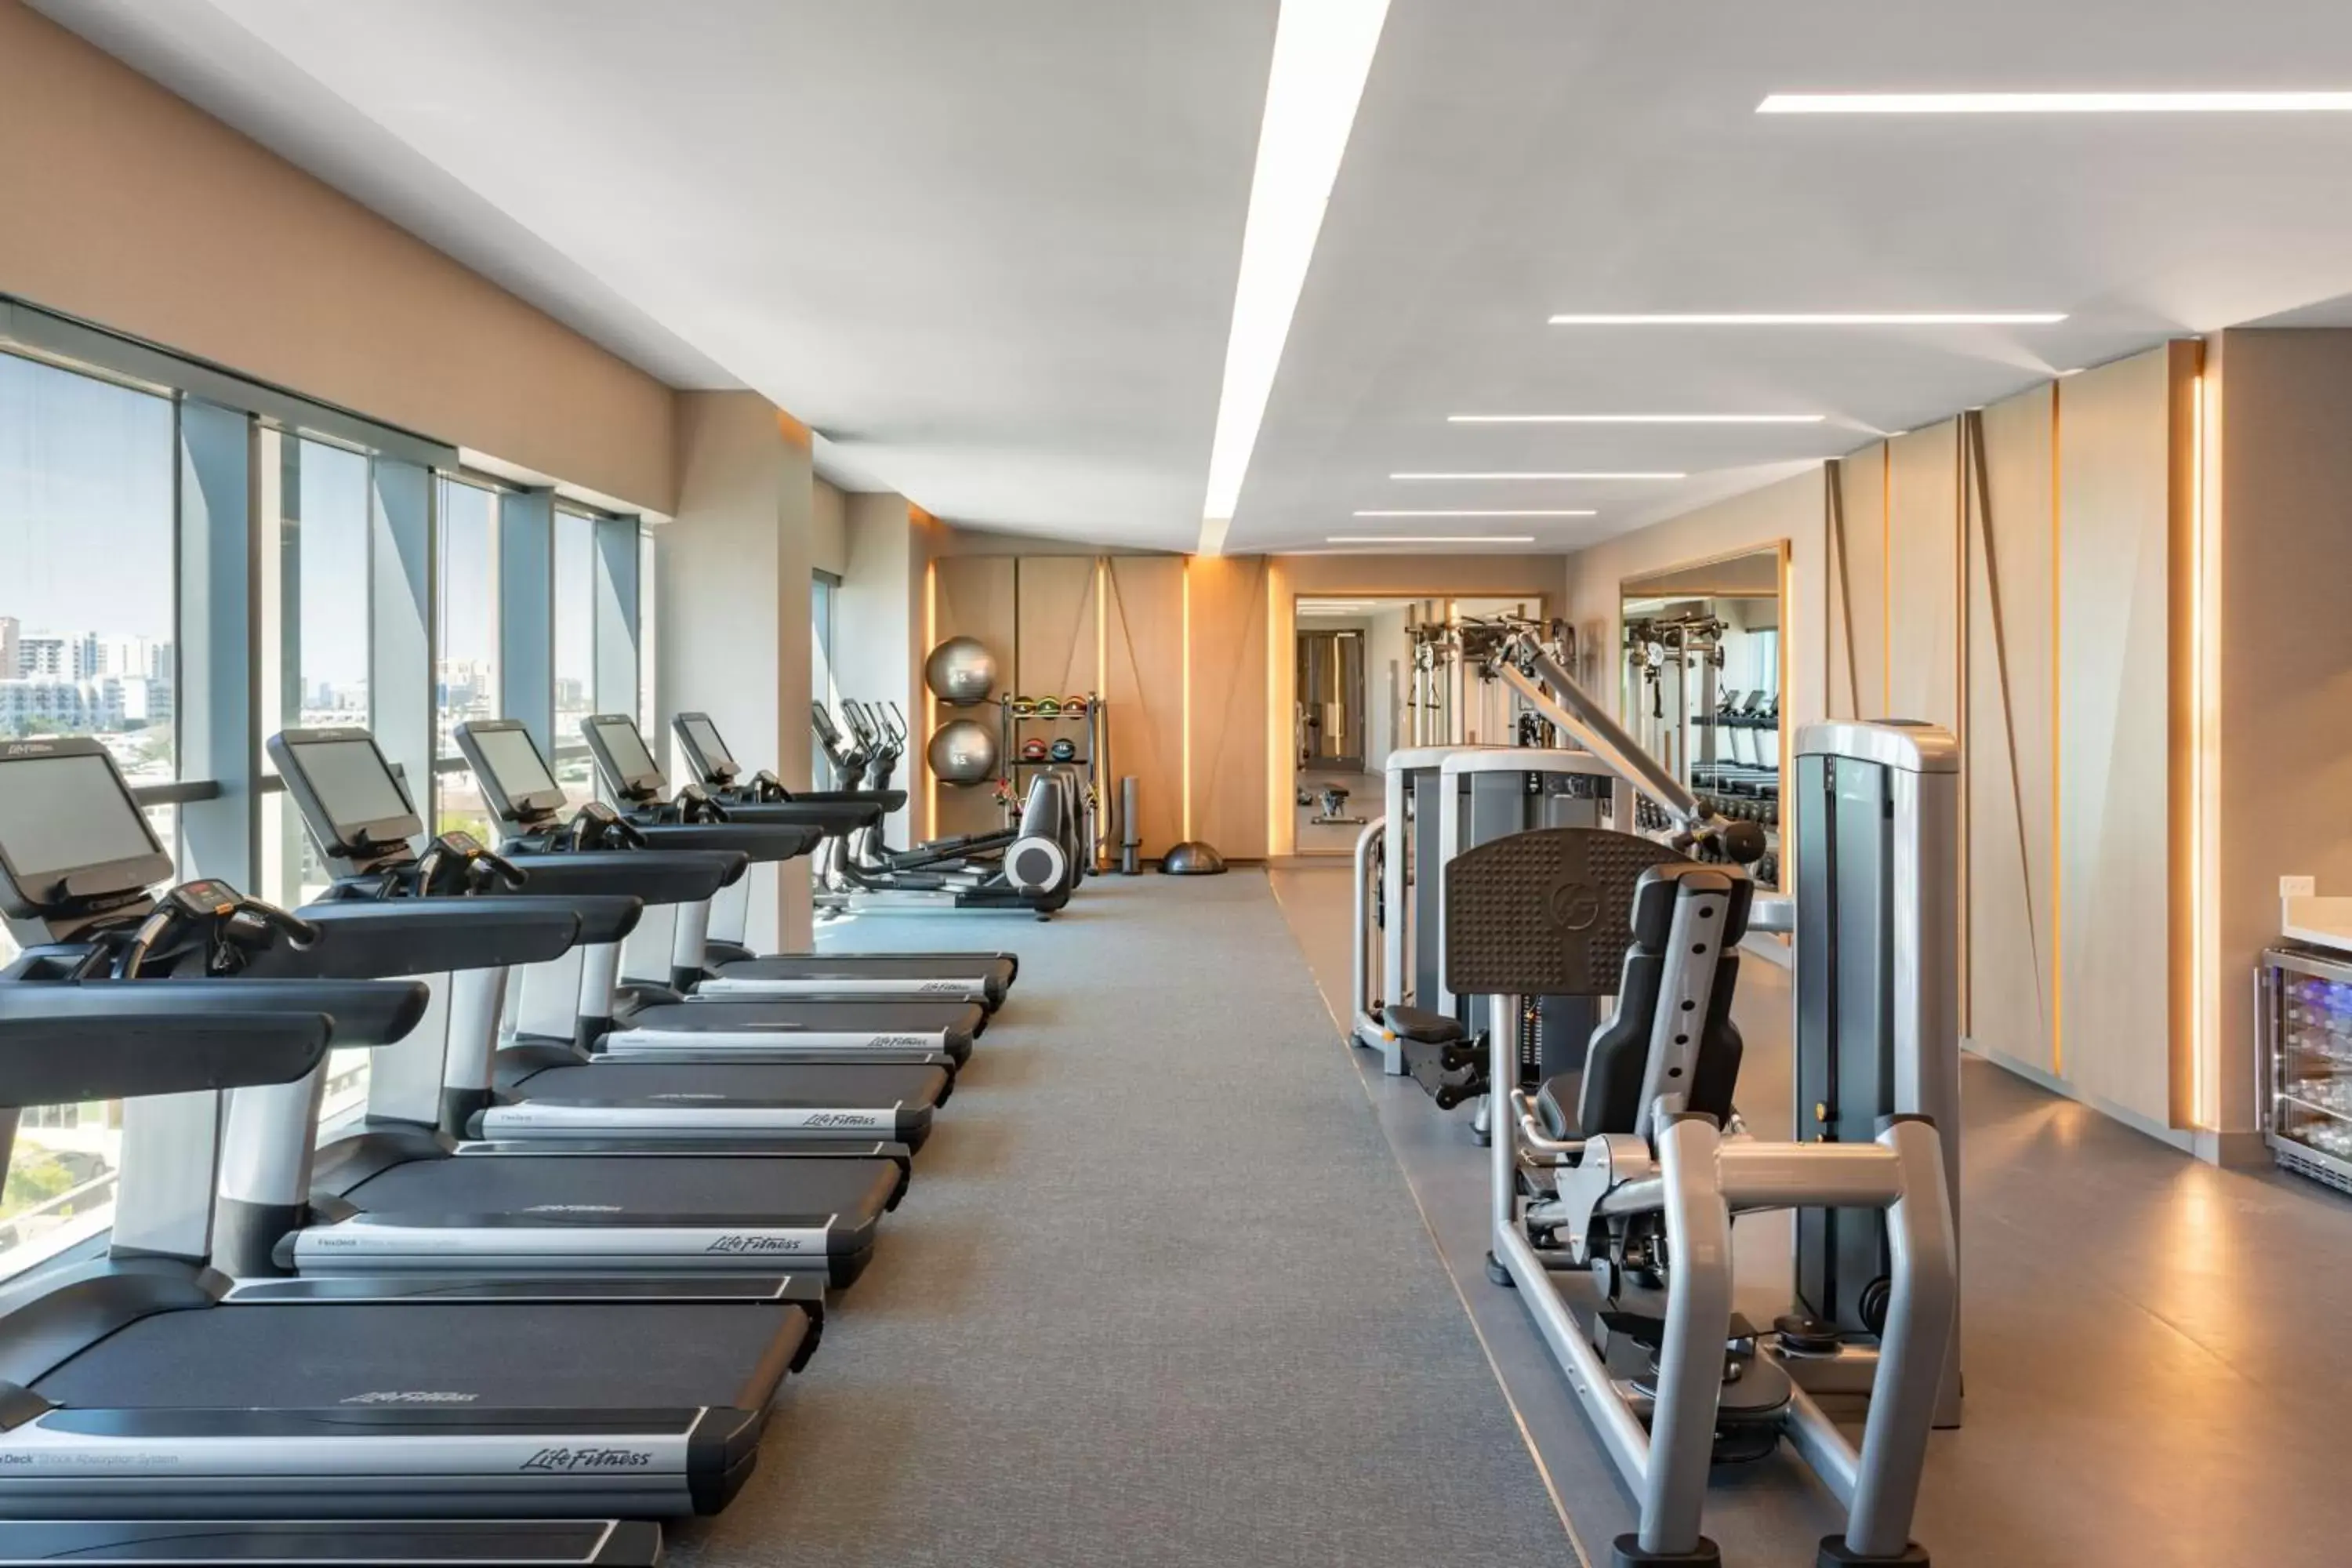 Fitness centre/facilities, Fitness Center/Facilities in JW Marriott Clearwater Beach Resort & Spa